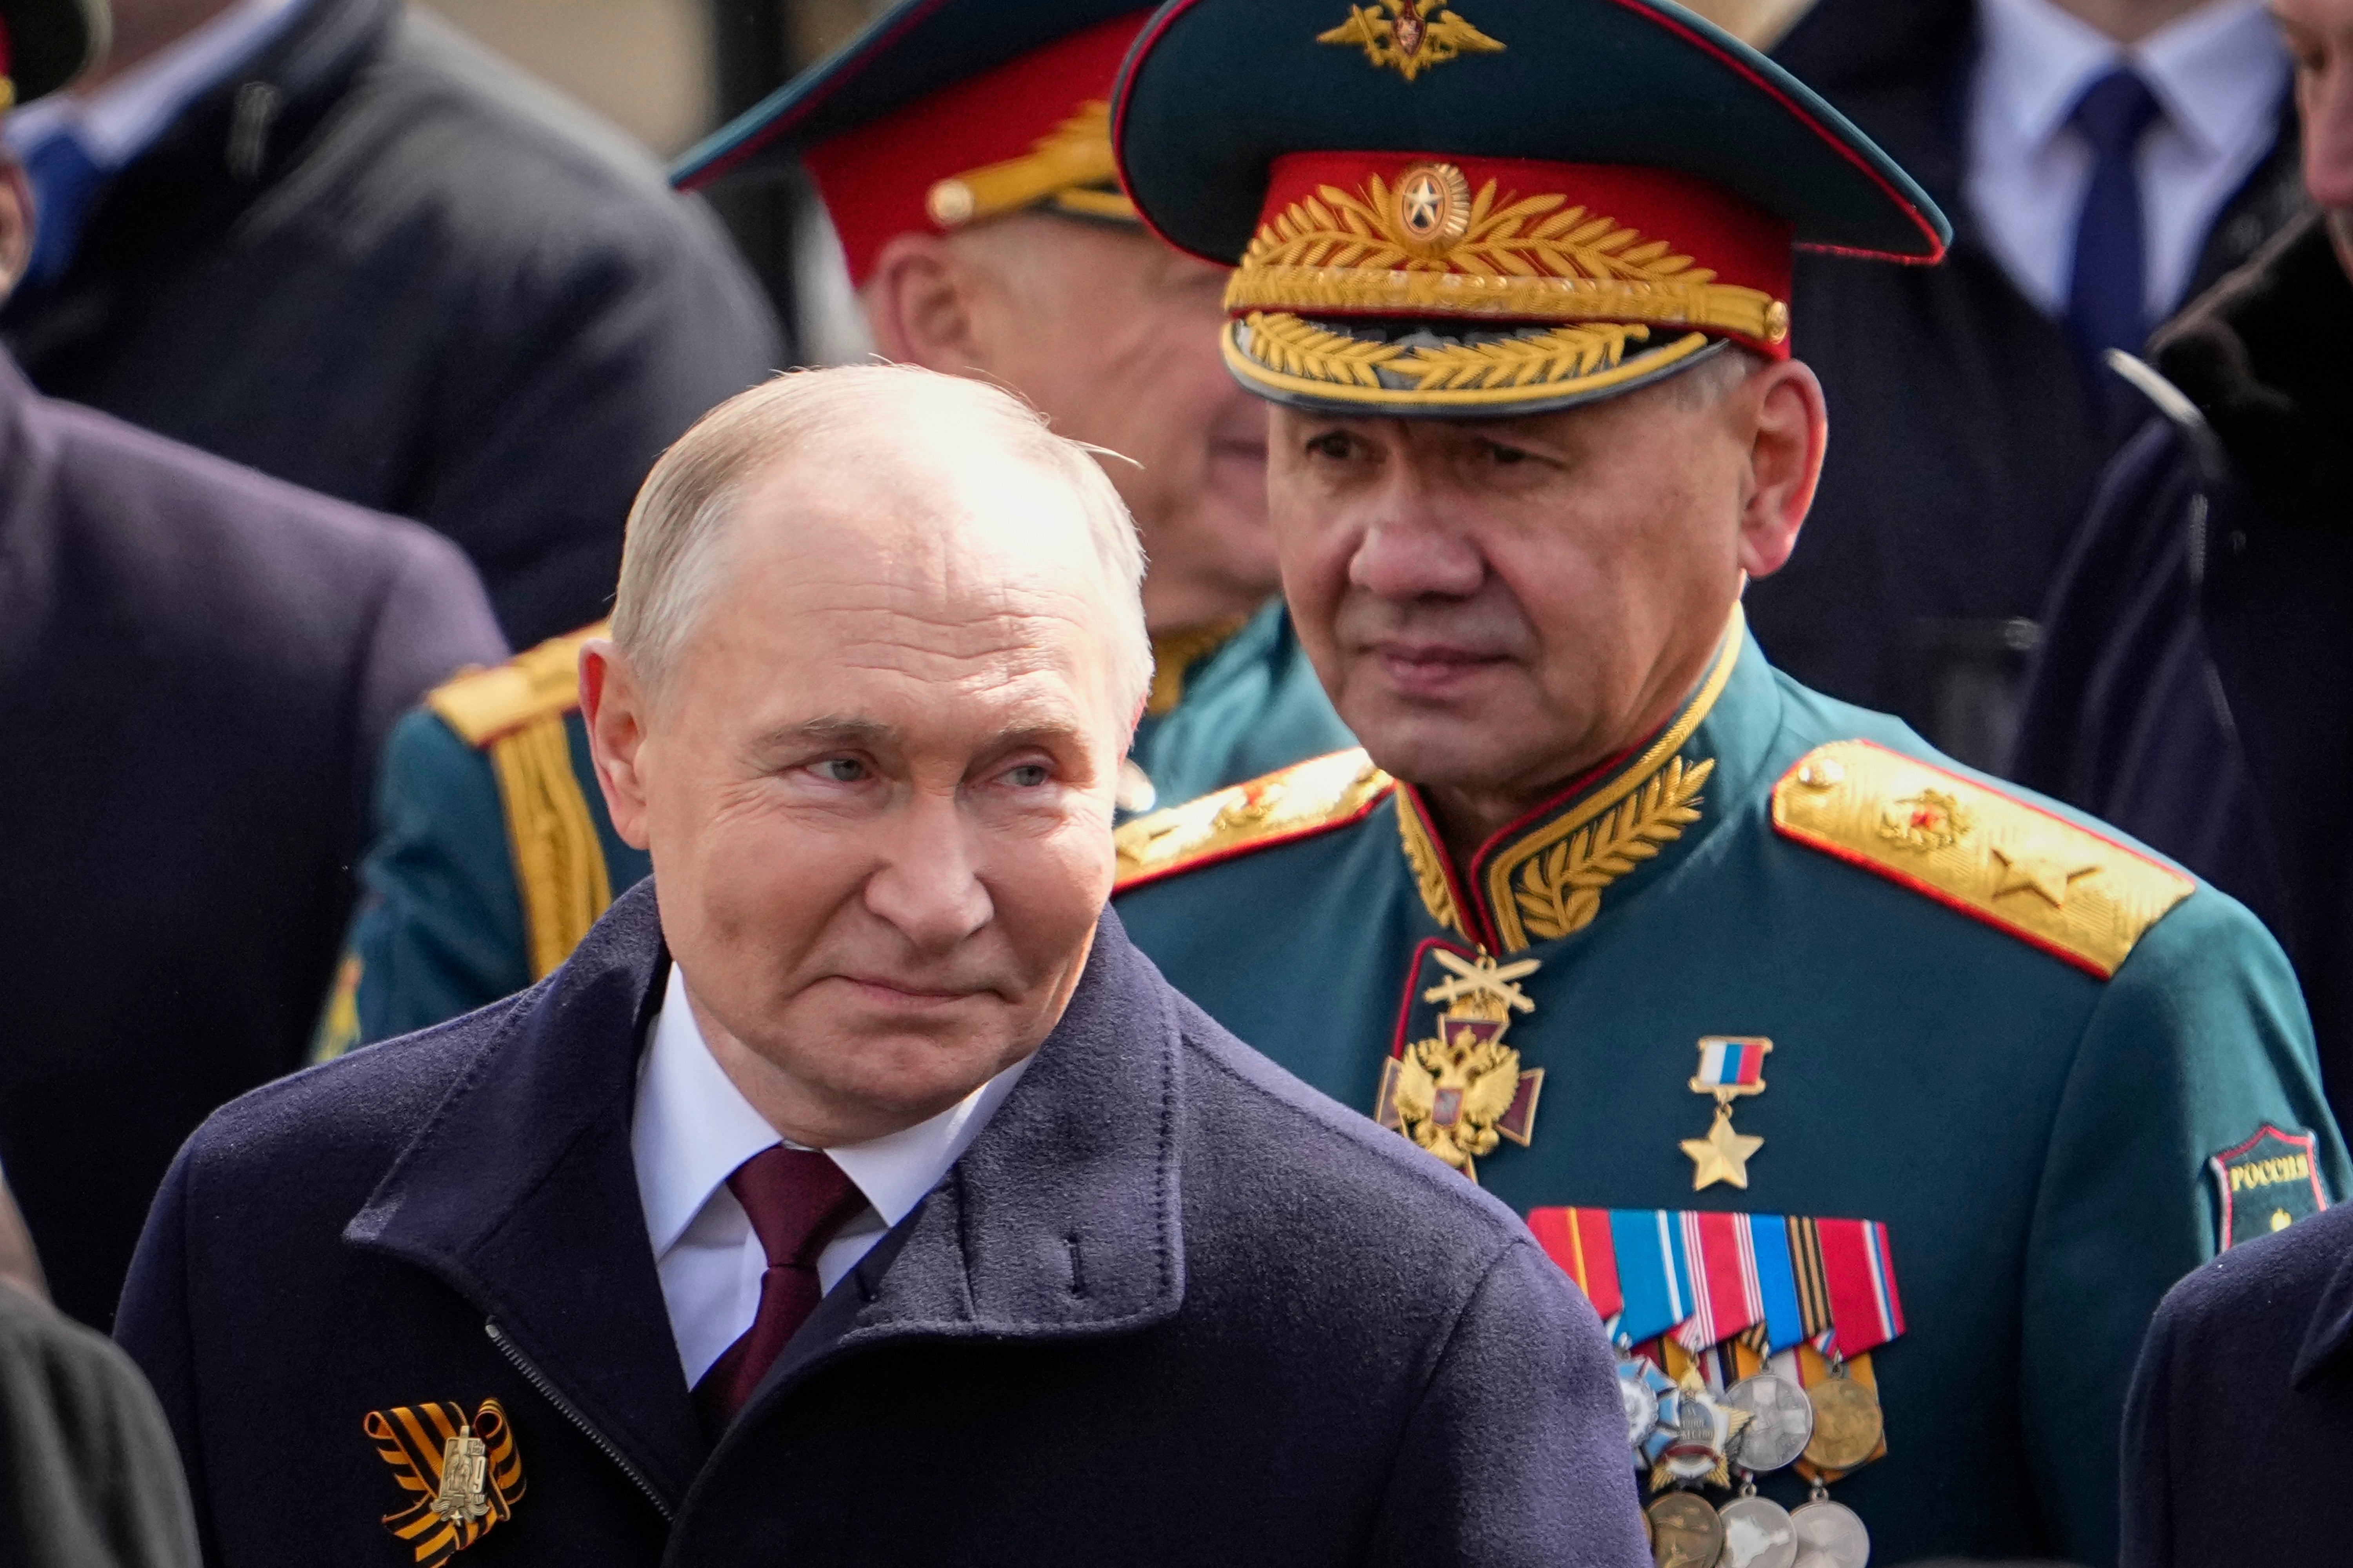 Russian President Vladimir Putin has proposed removing Russian Defense Minister Sergei Shoigu (right) from his post